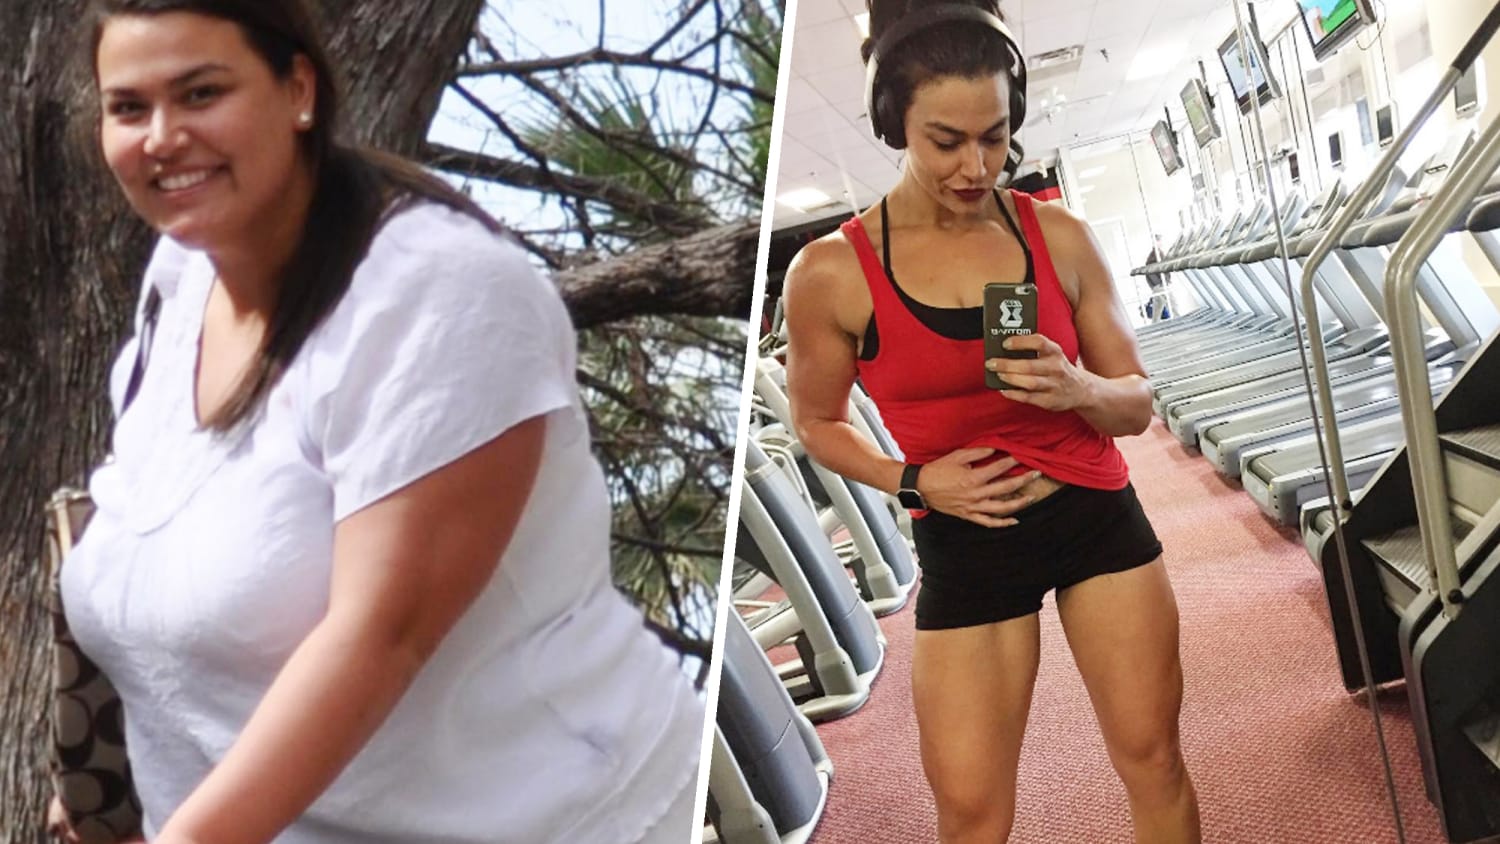 How this woman lost 160 pounds in 2 years by following 5 steps.